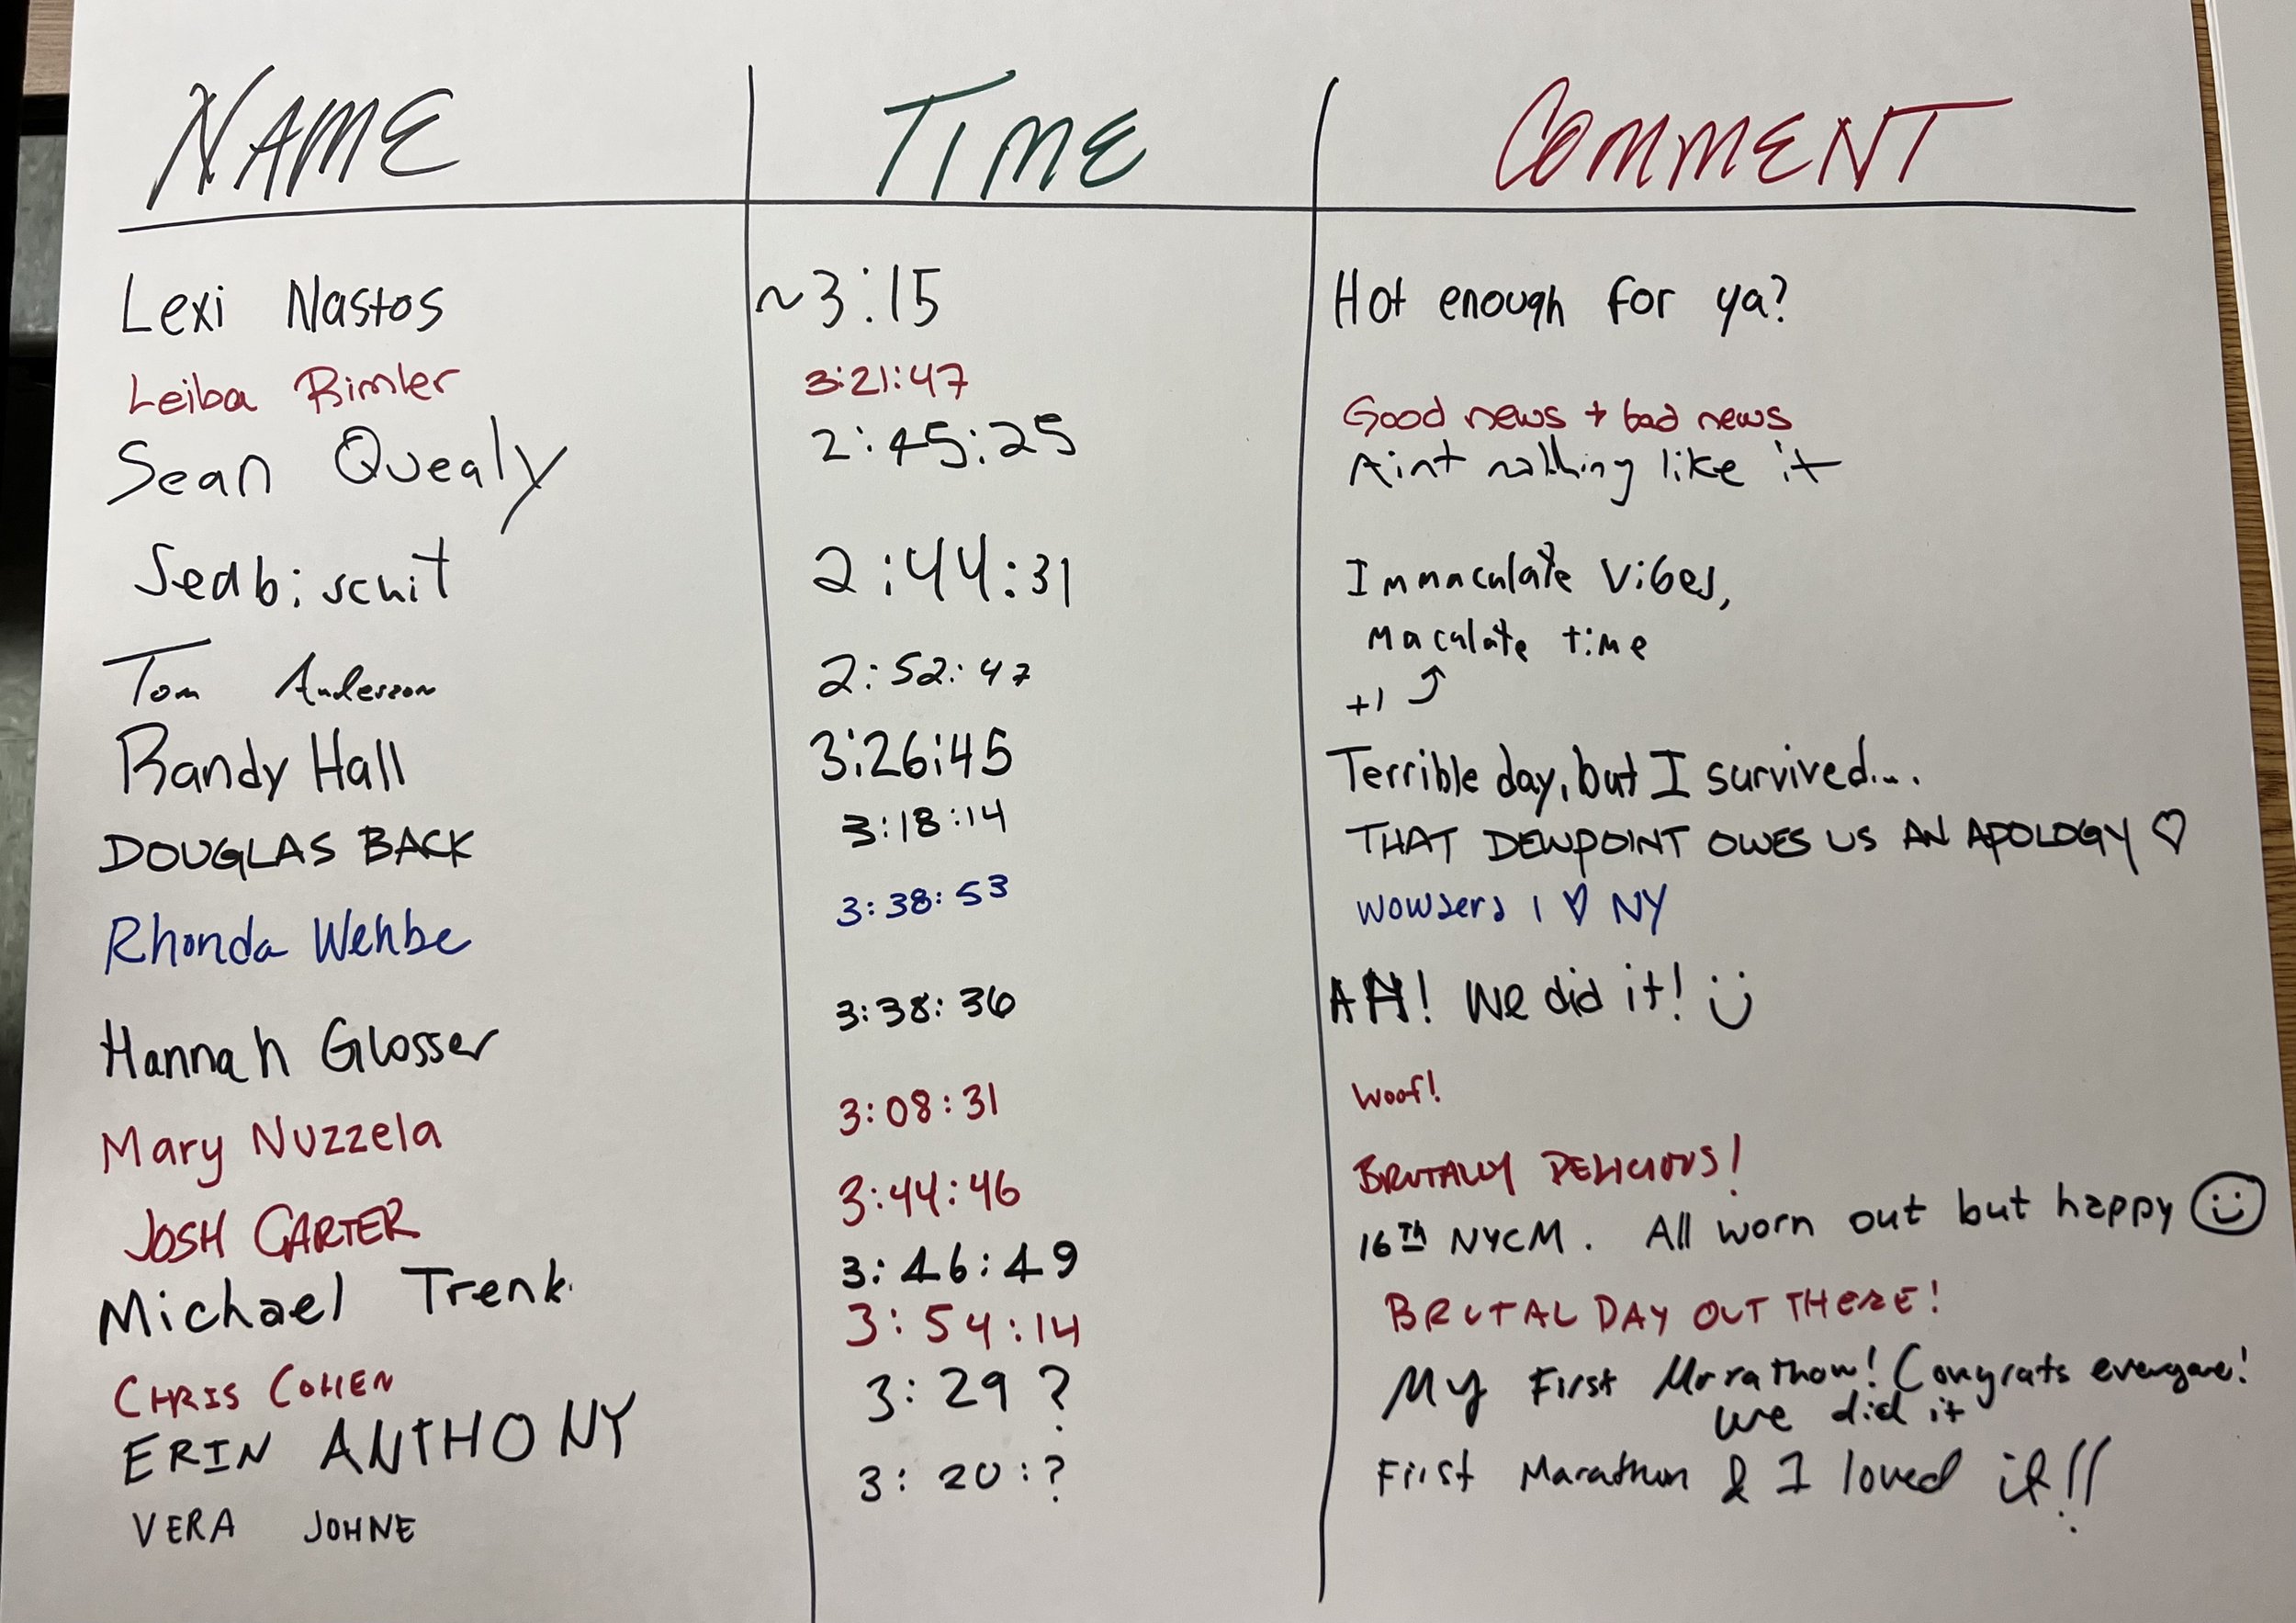 Finisher times at statements at the post-race reunion (Photo by Linda S. Chan)